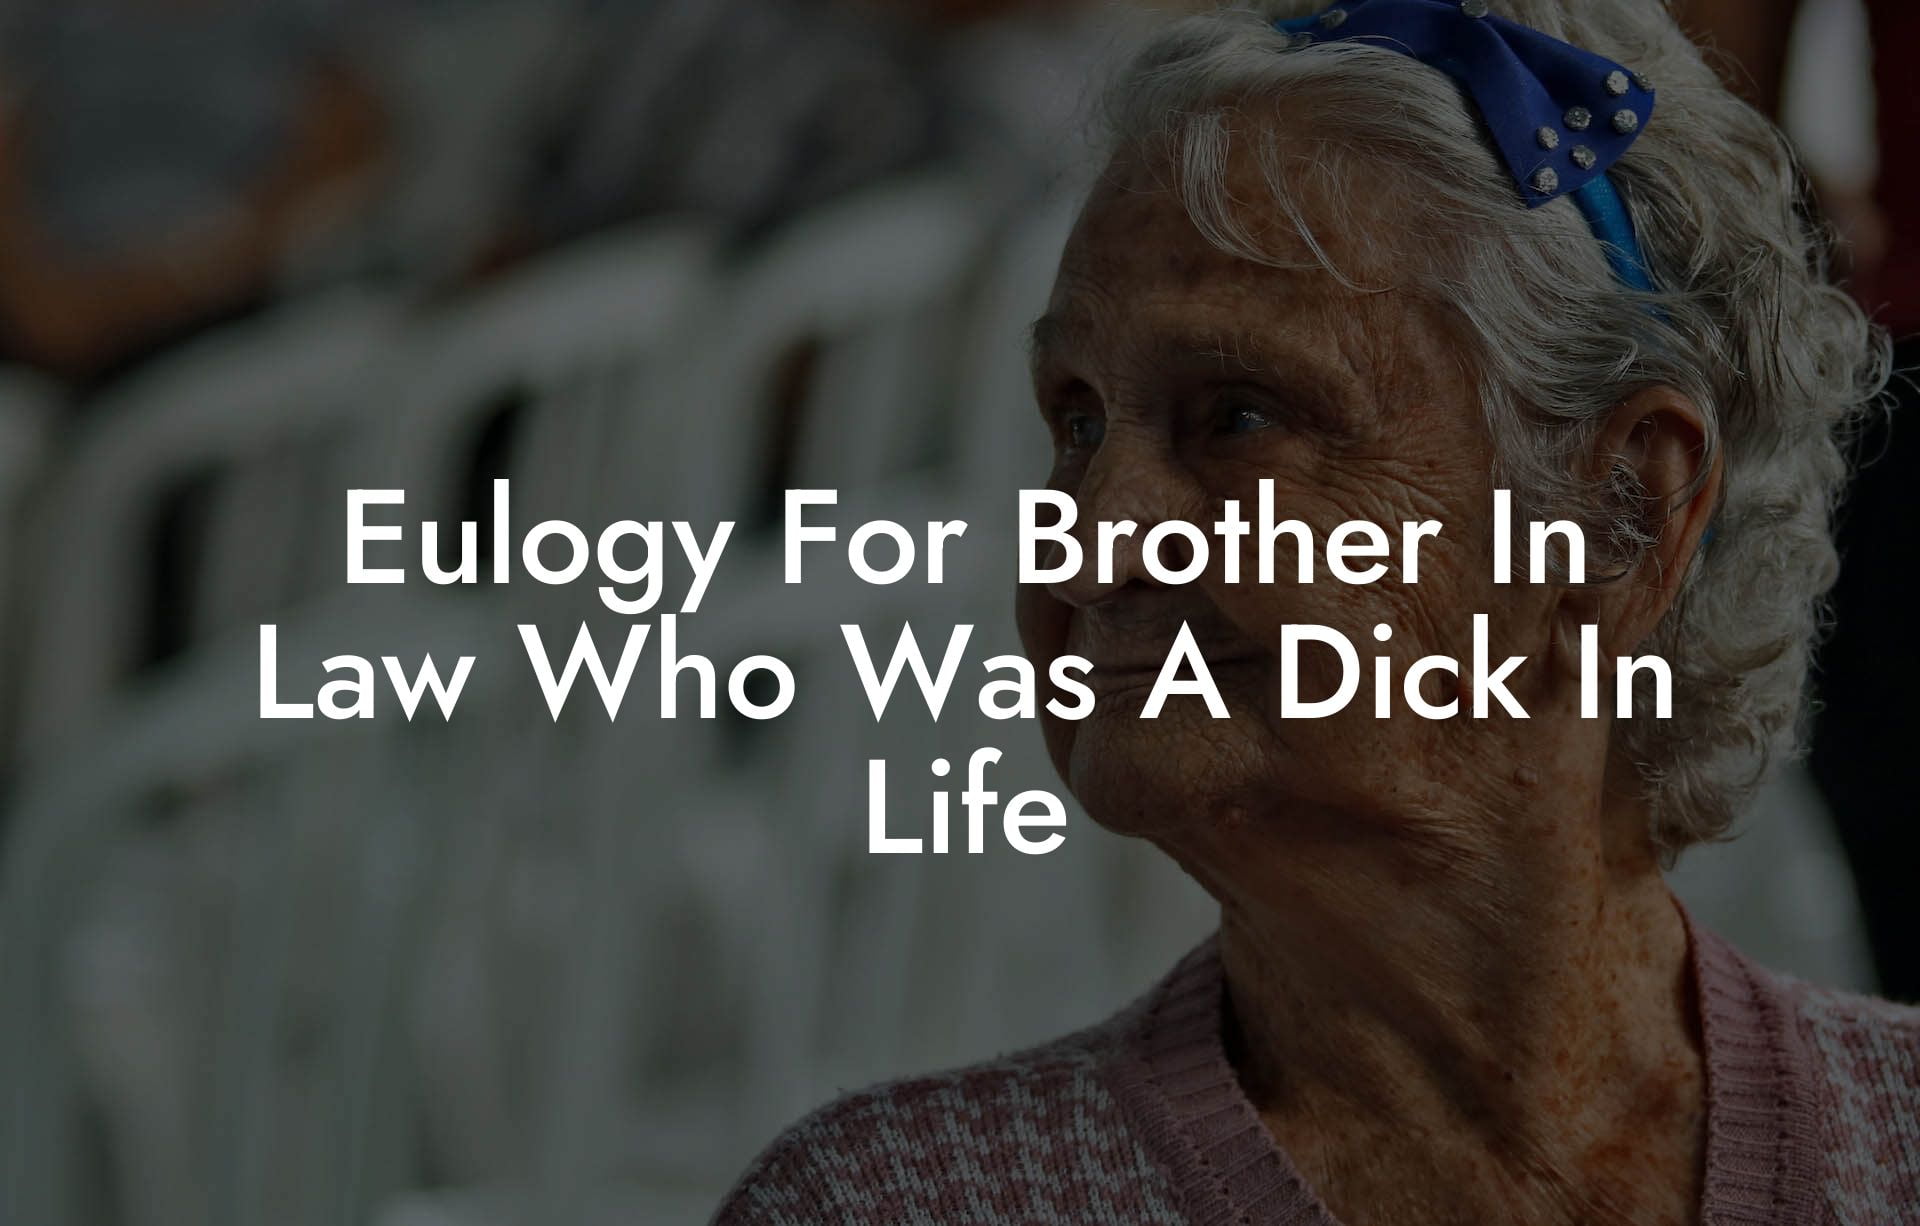 Eulogy For Brother In Law Who Was A Dick In Life